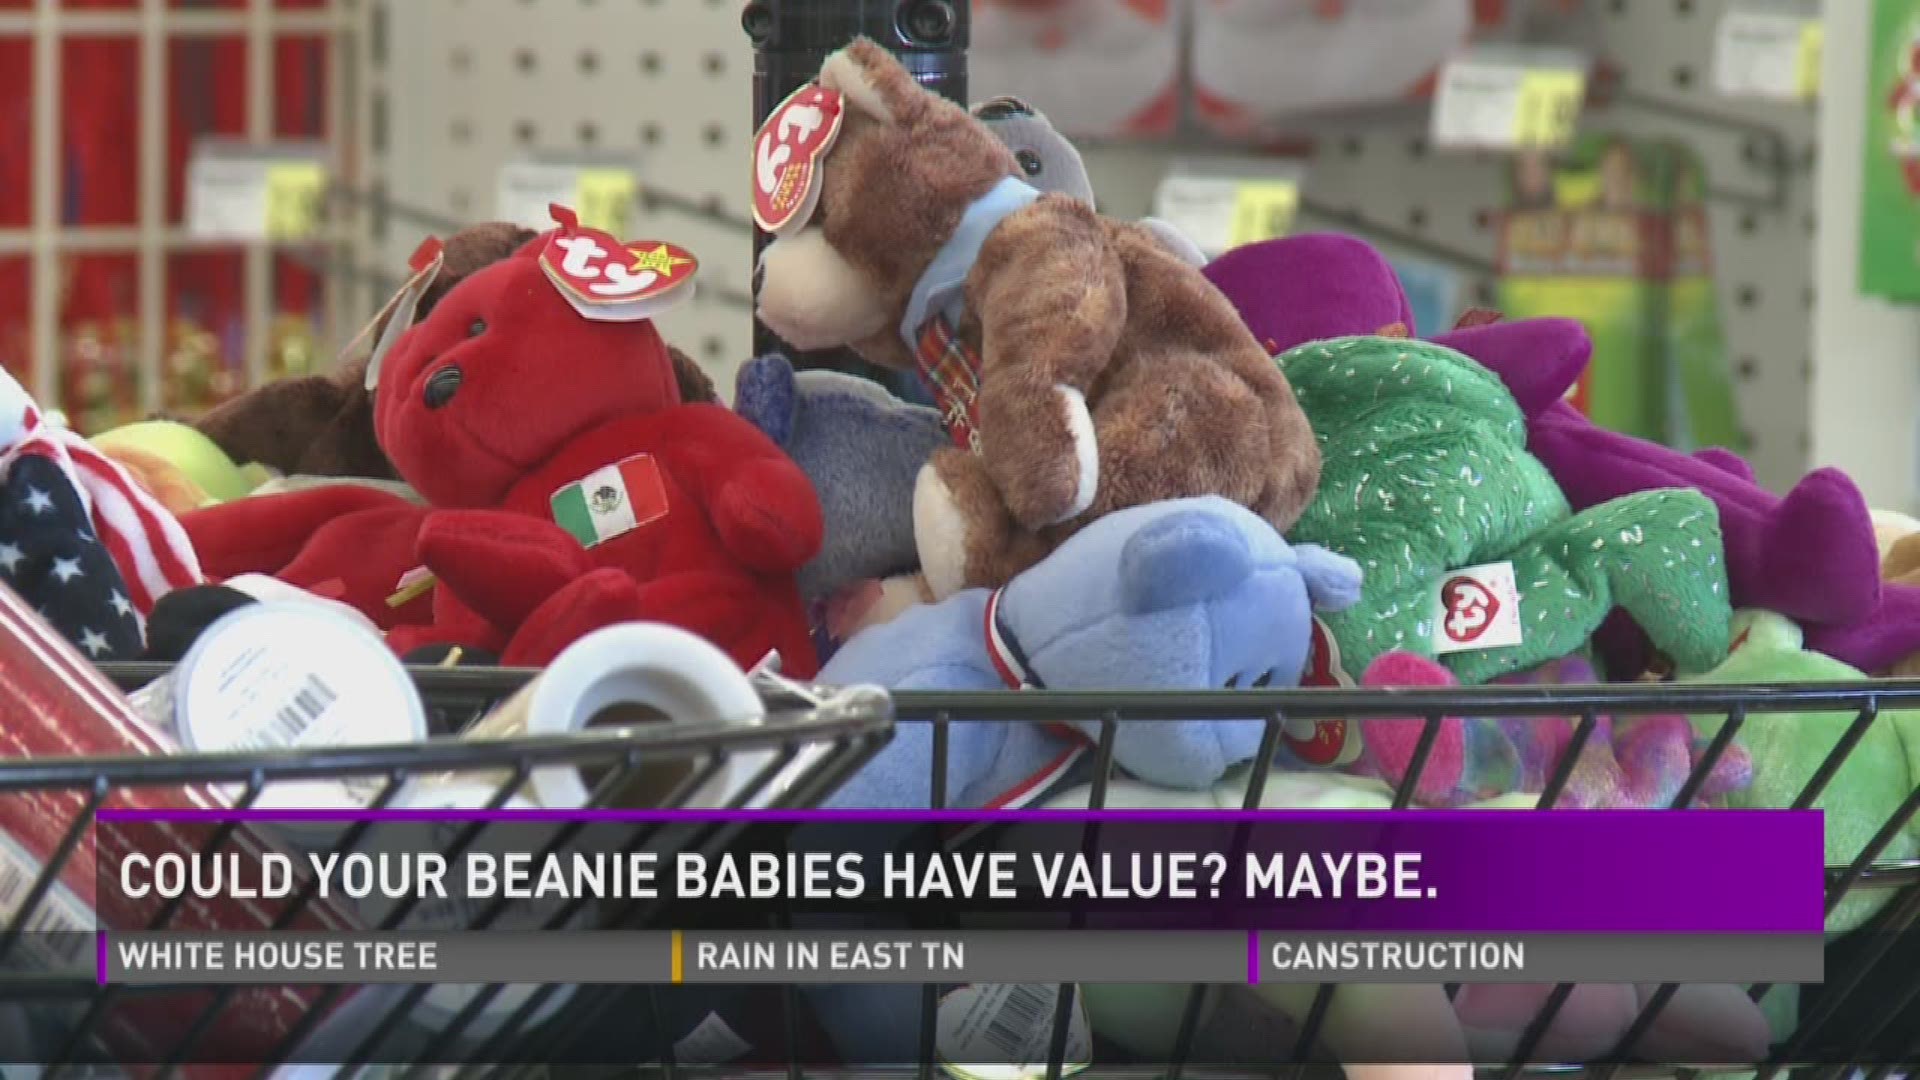 Nov. 23, 2016: Remember the Beanie Baby craze? Many of us held on to those toys, thinking they'd be worth a lot of money someday. Well, some of them are.